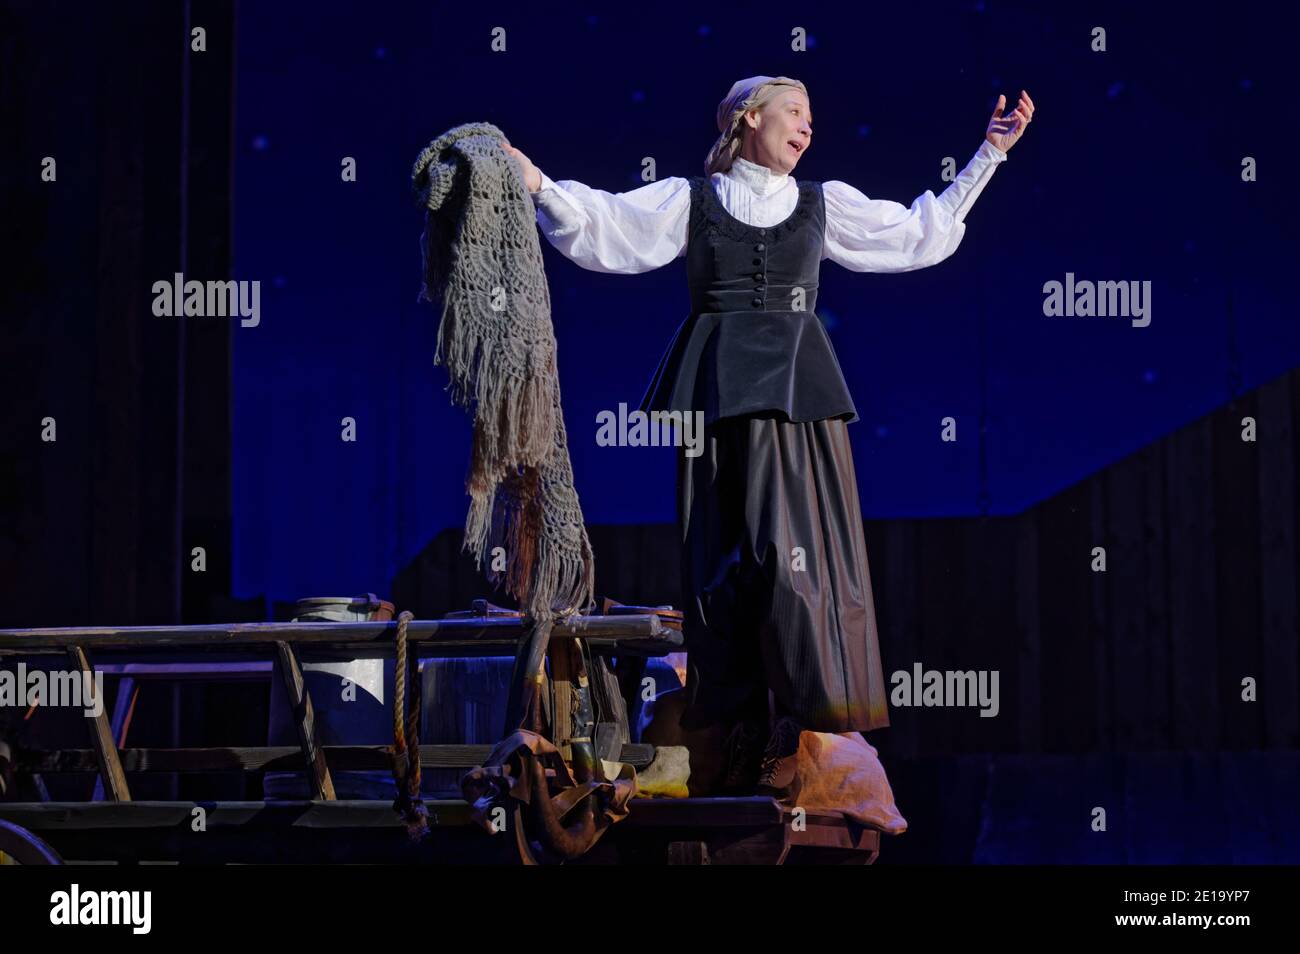 Darya Jurgens as Golde in the musical Fiddler on the Roof on the stage of the Music Hall theatre in St. Petersburg, Russia Stock Photo